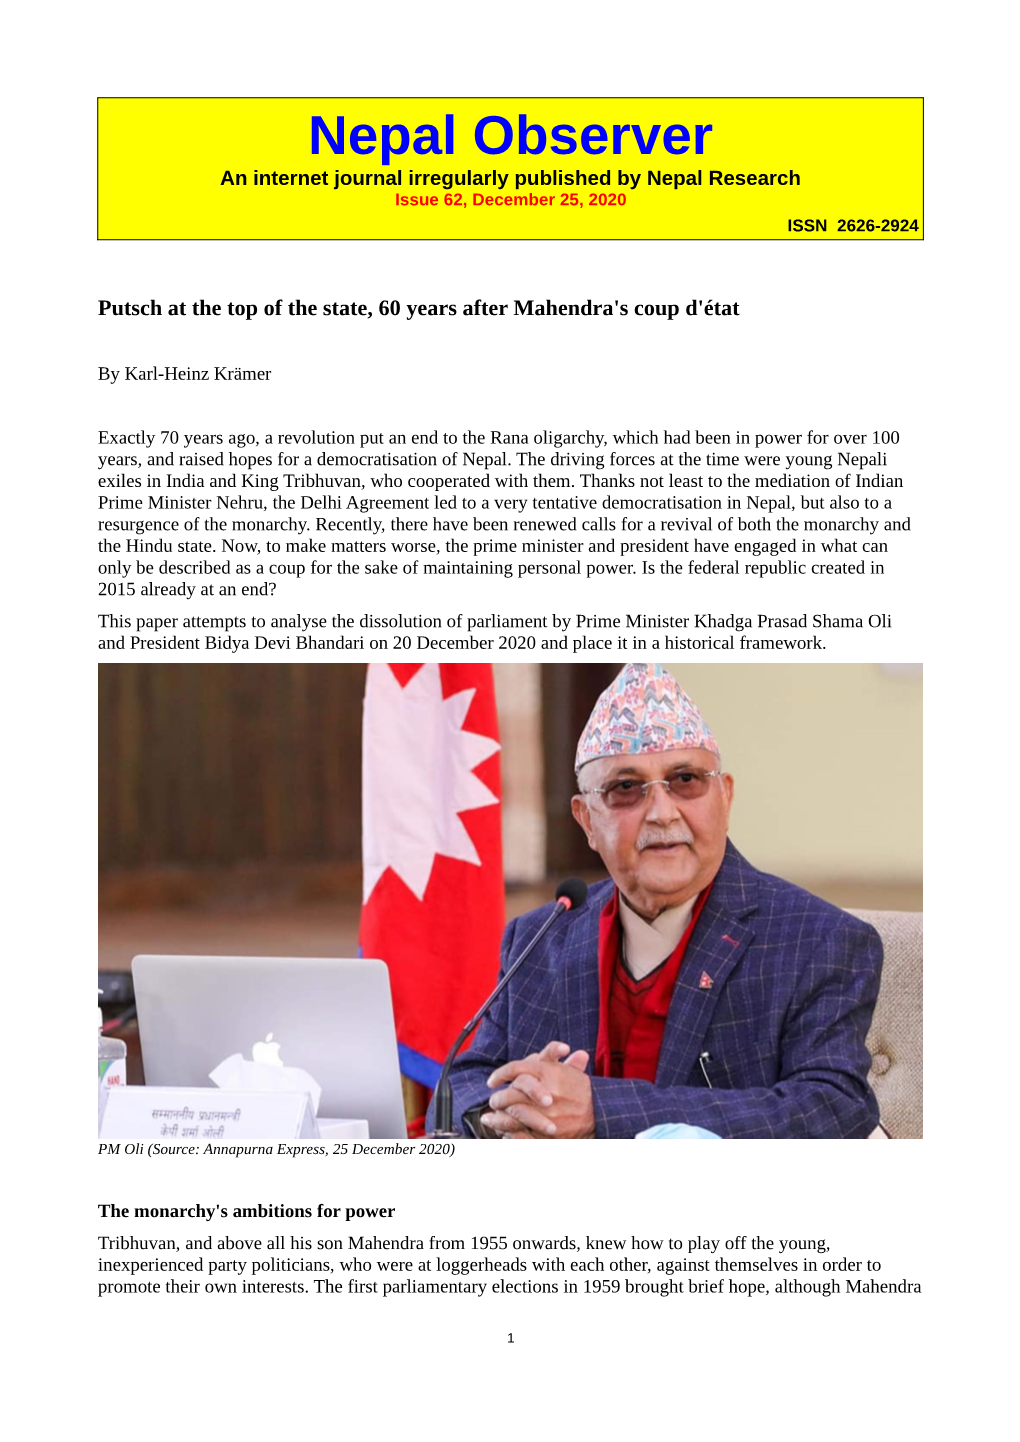 Nepal Observer an Internet Journal Irregularly Published by Nepal Research Issue 62, December 25, 2020 ISSN 2626-2924